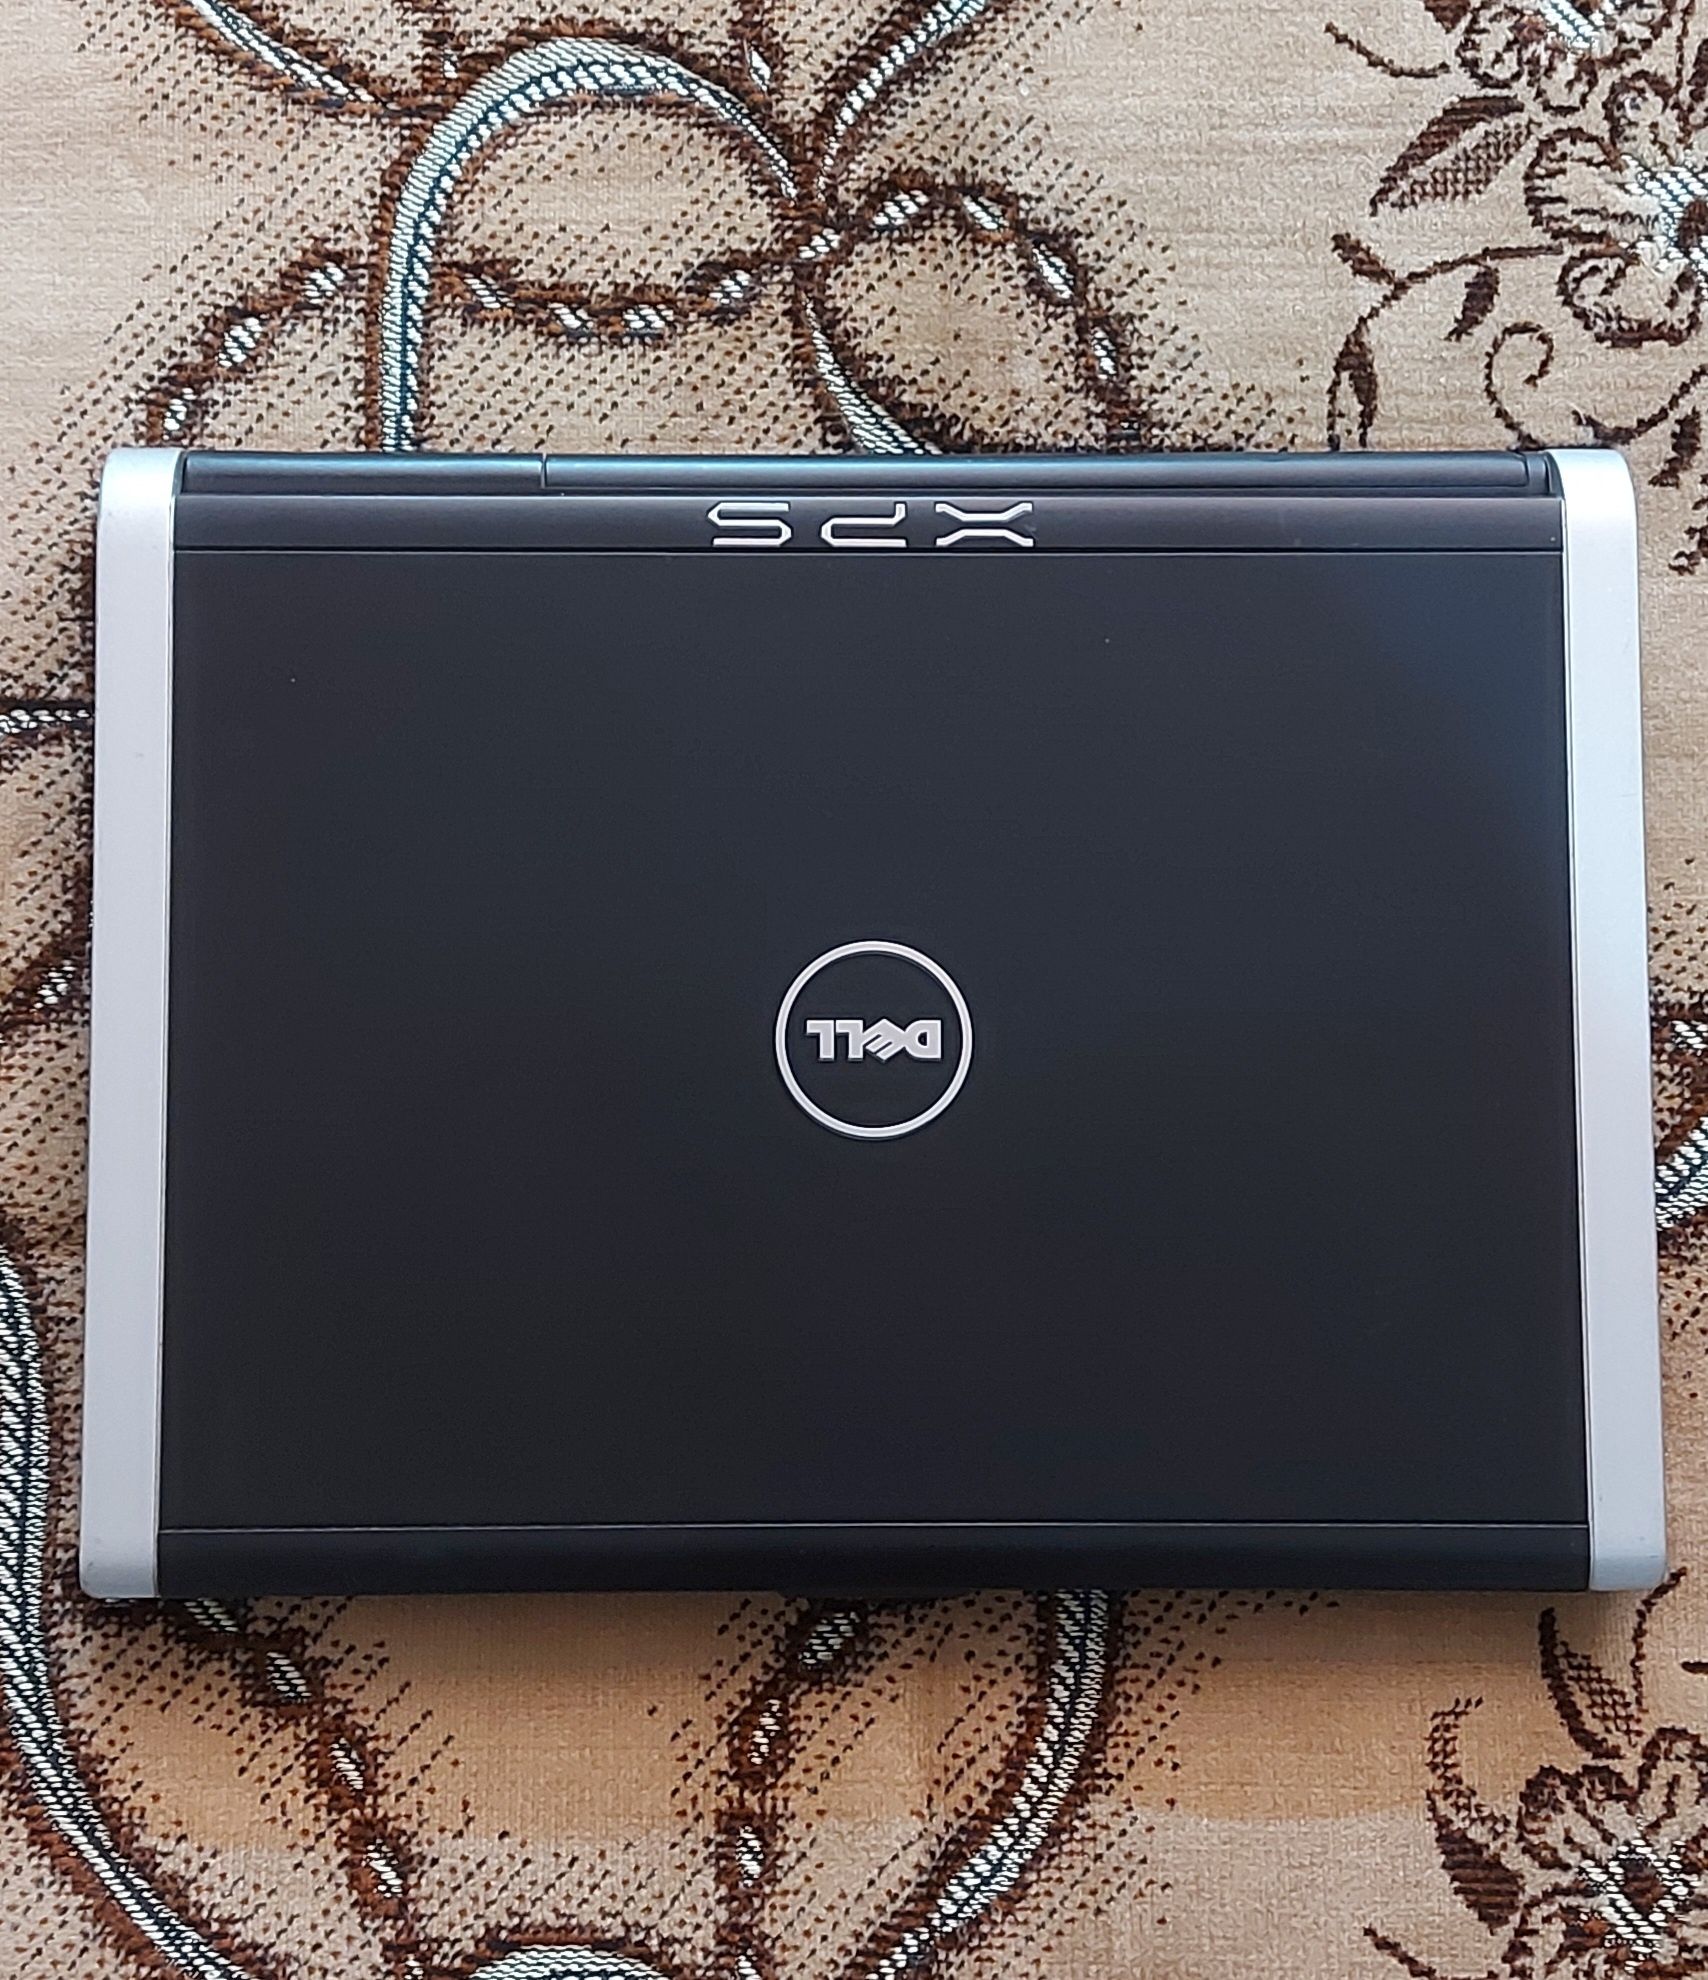 Laptop Dell PP25L , core2duo, 4GB, 320 HDD